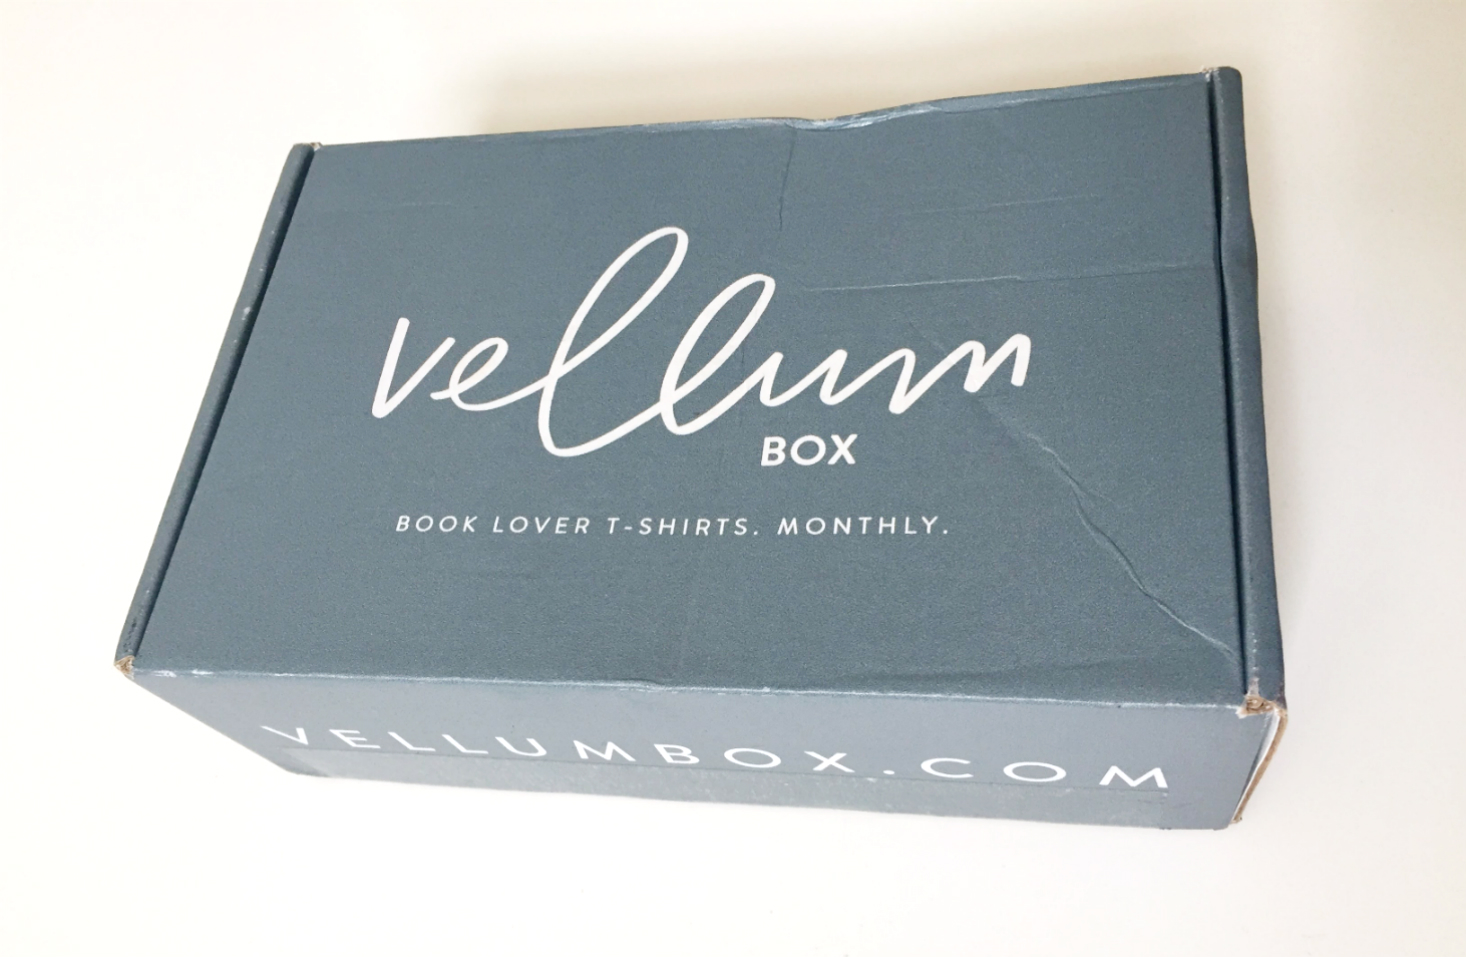 Vellum Box Subscription Review + Coupon – February 2018